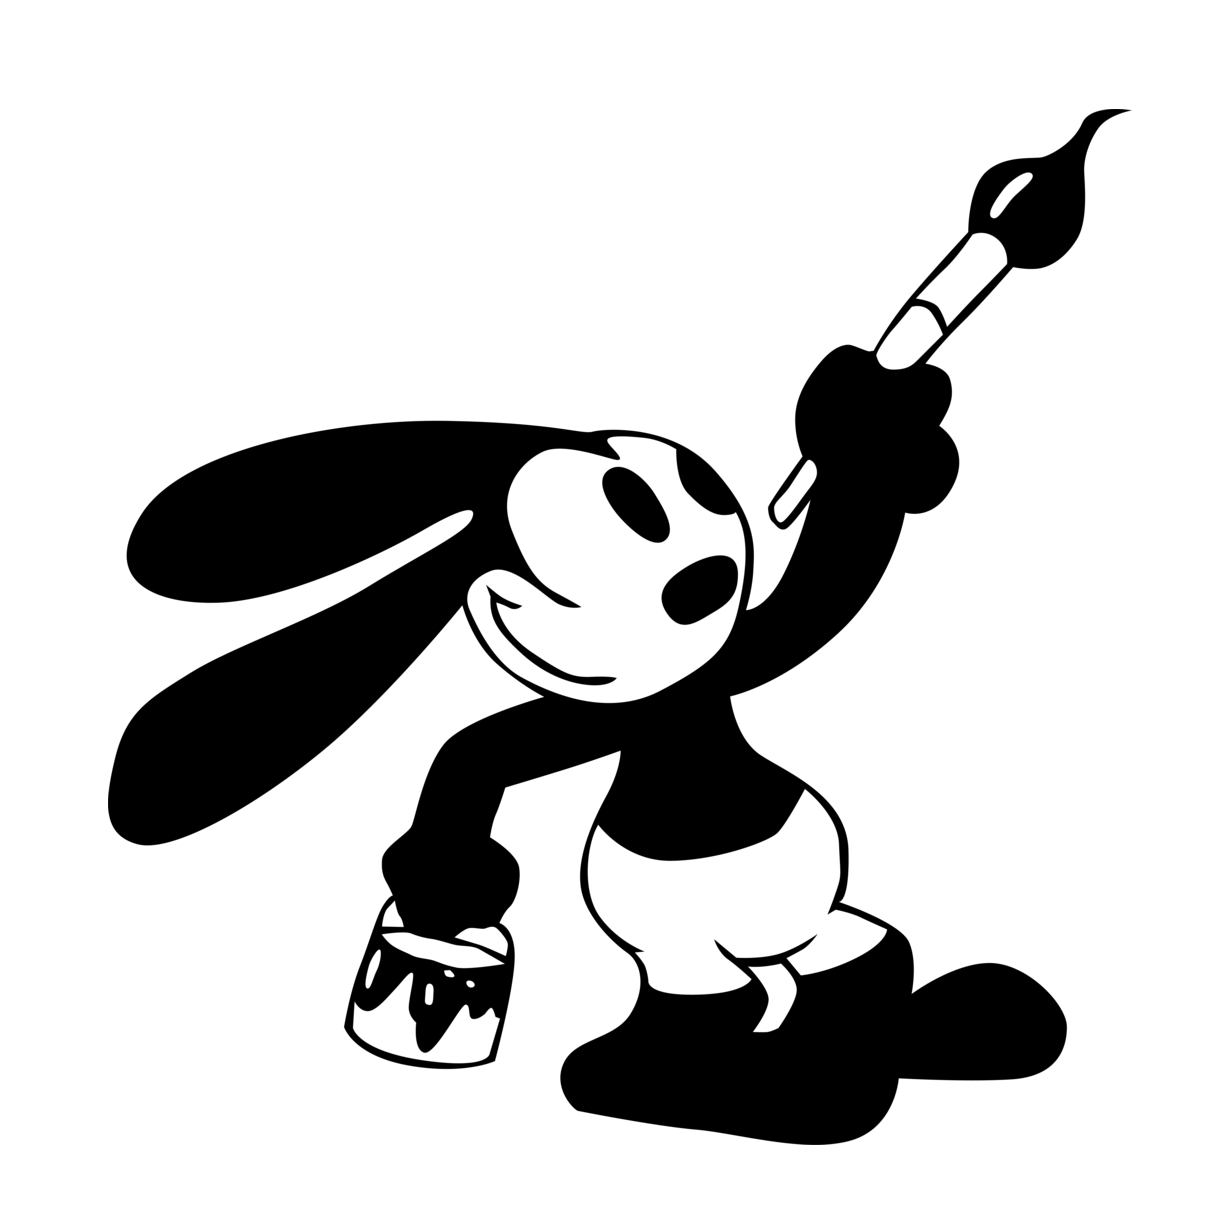 Oswald The Lucky Rabbit PNG HD pngteam.com